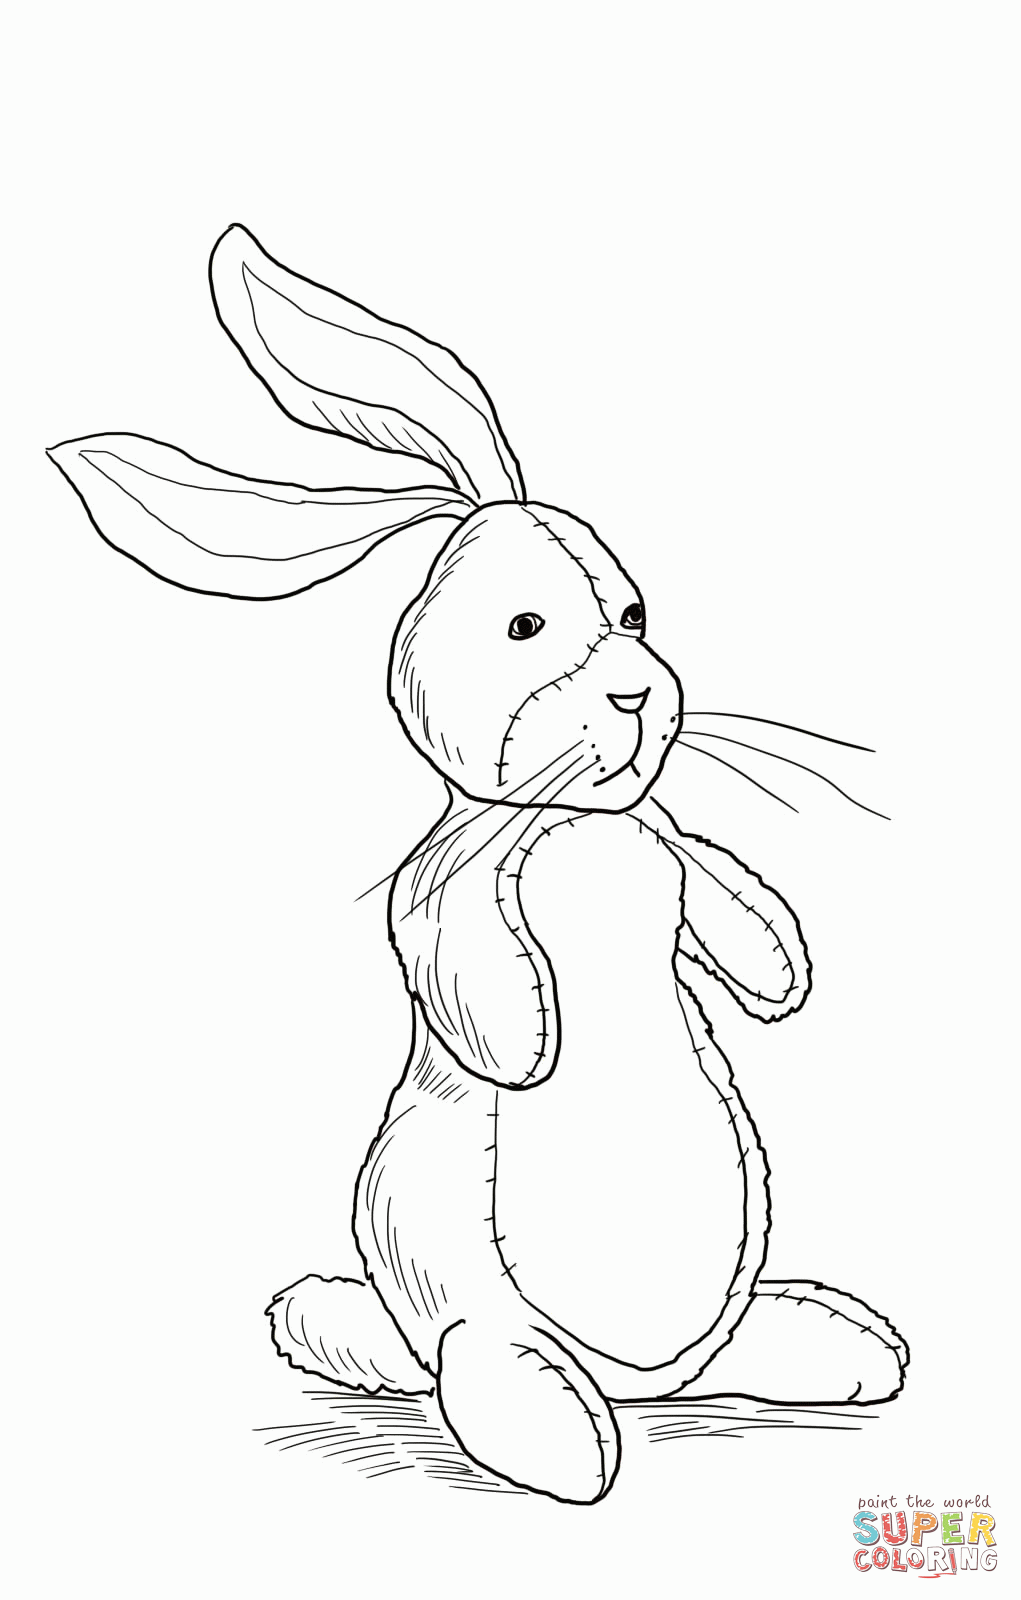 Velveteen rabbit coloring page